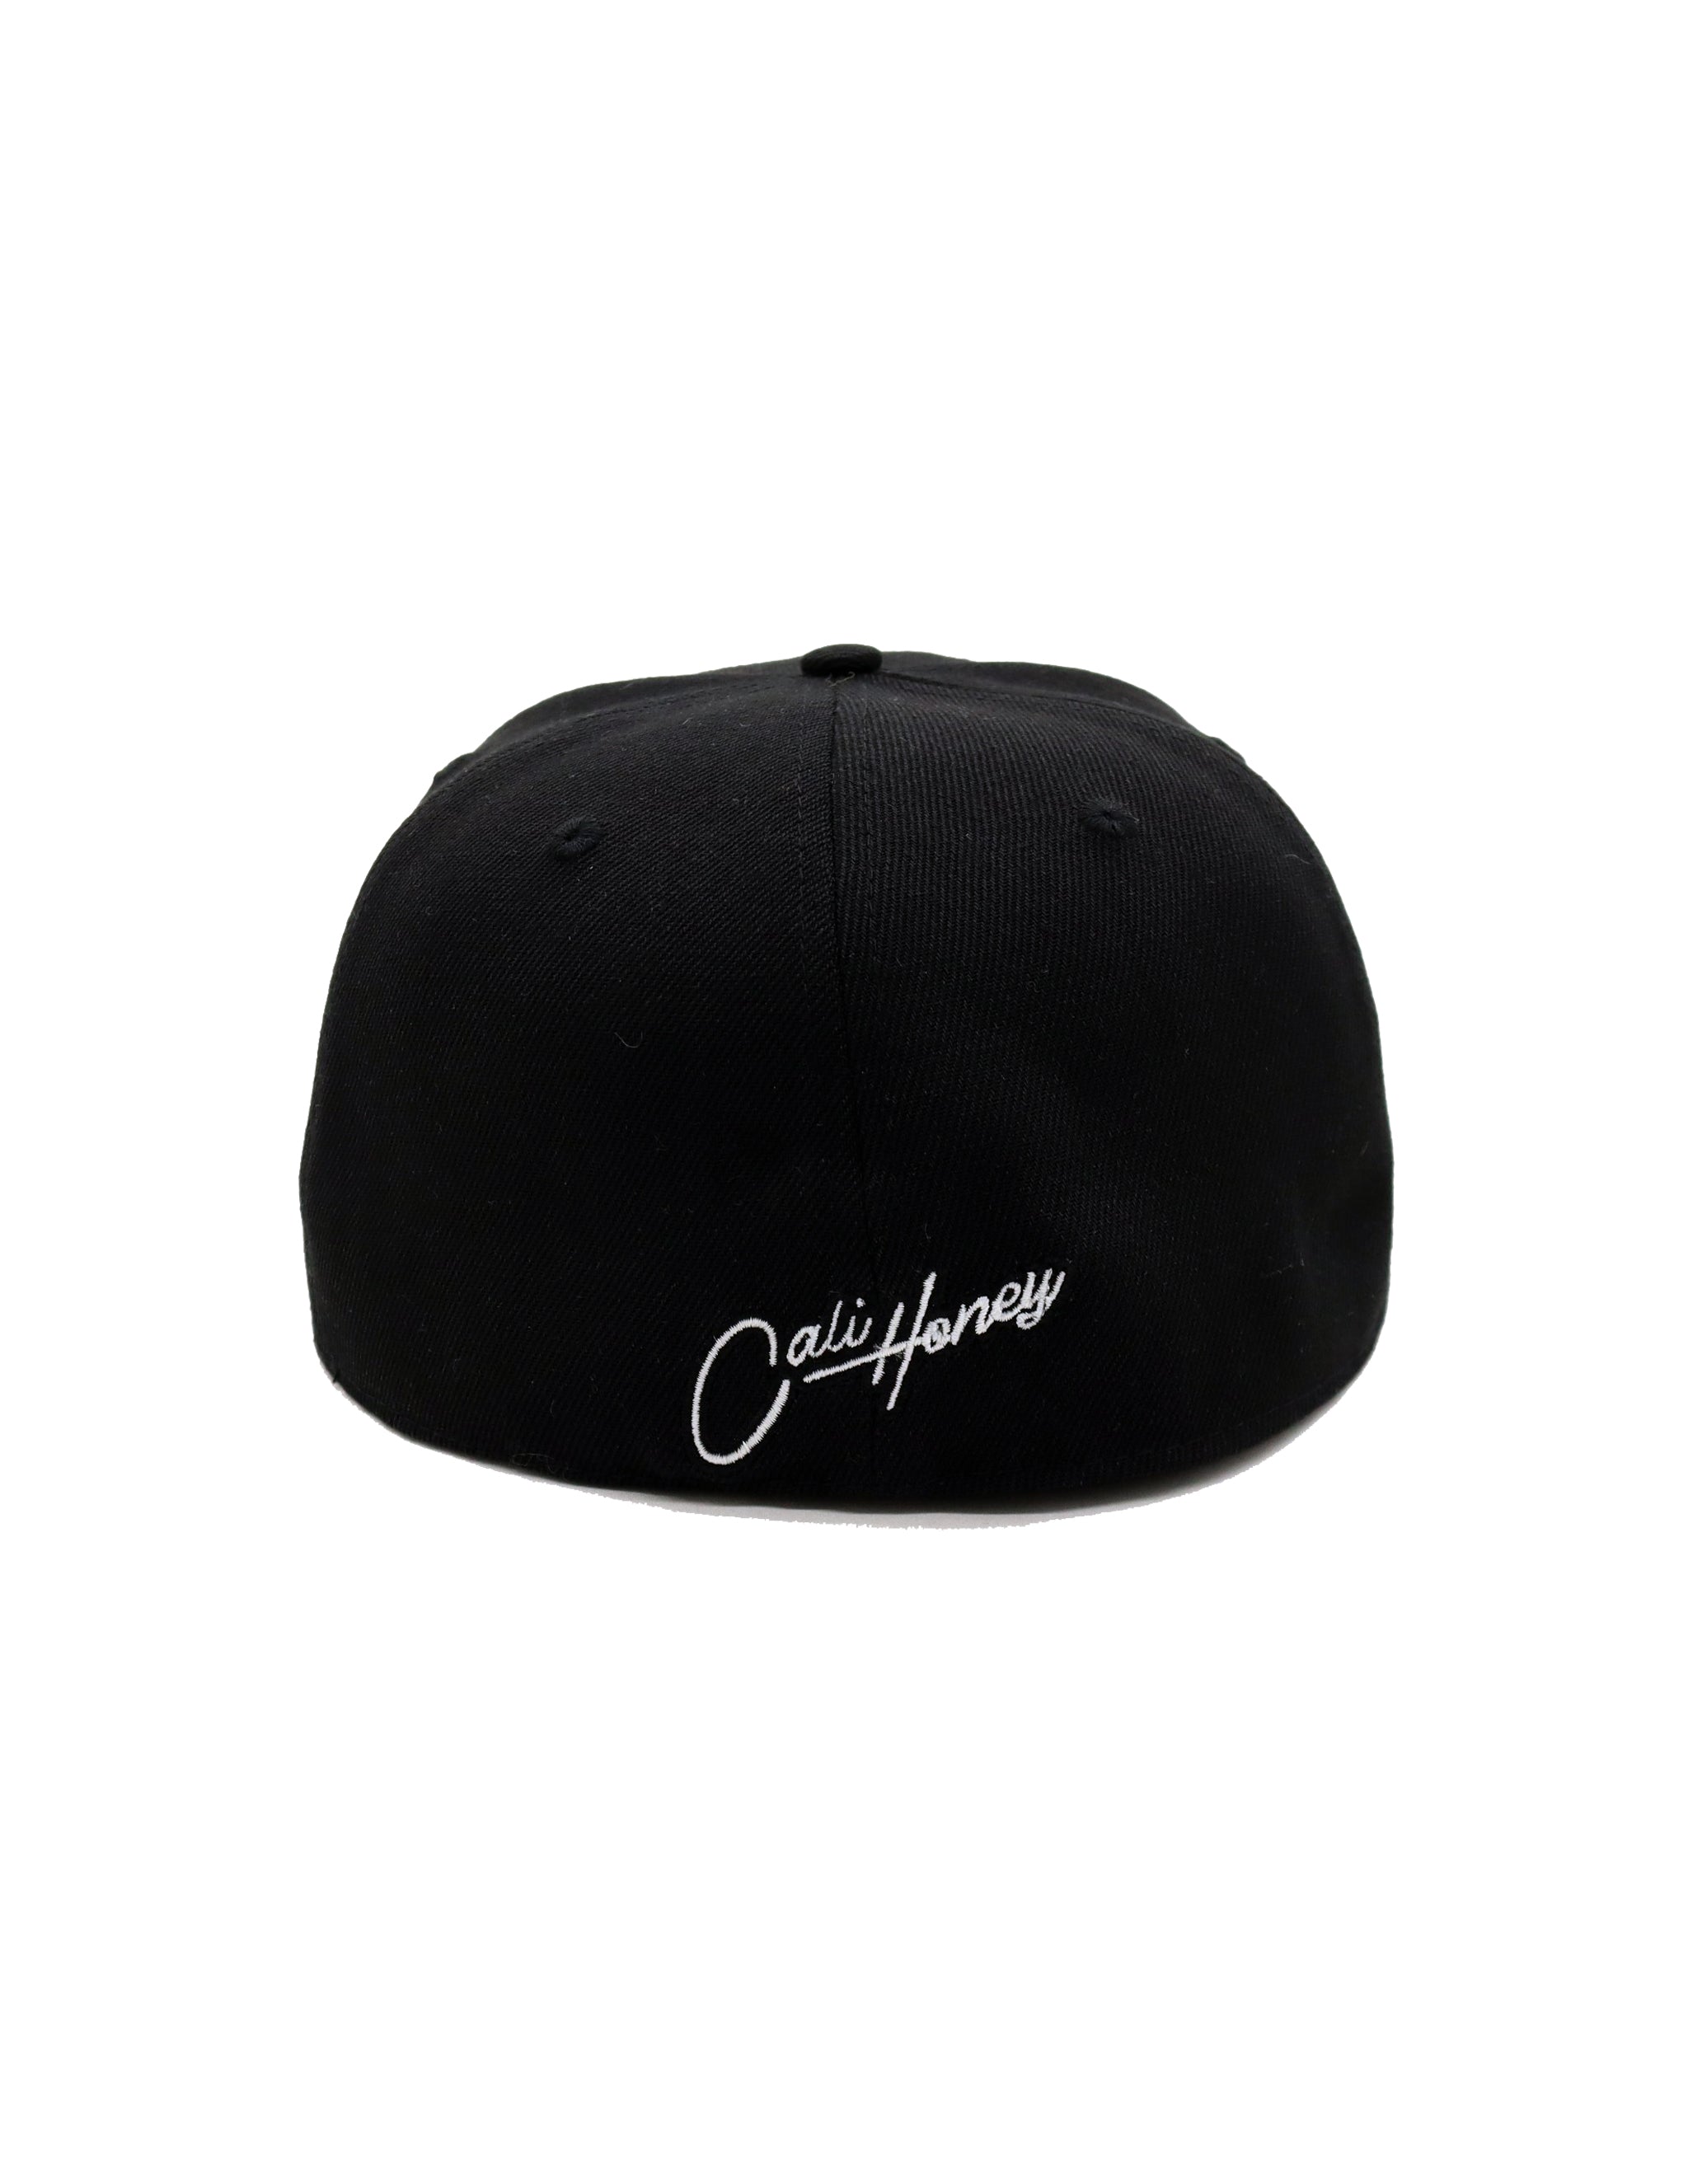 Cali Honey NYC Drip Fitted Hat